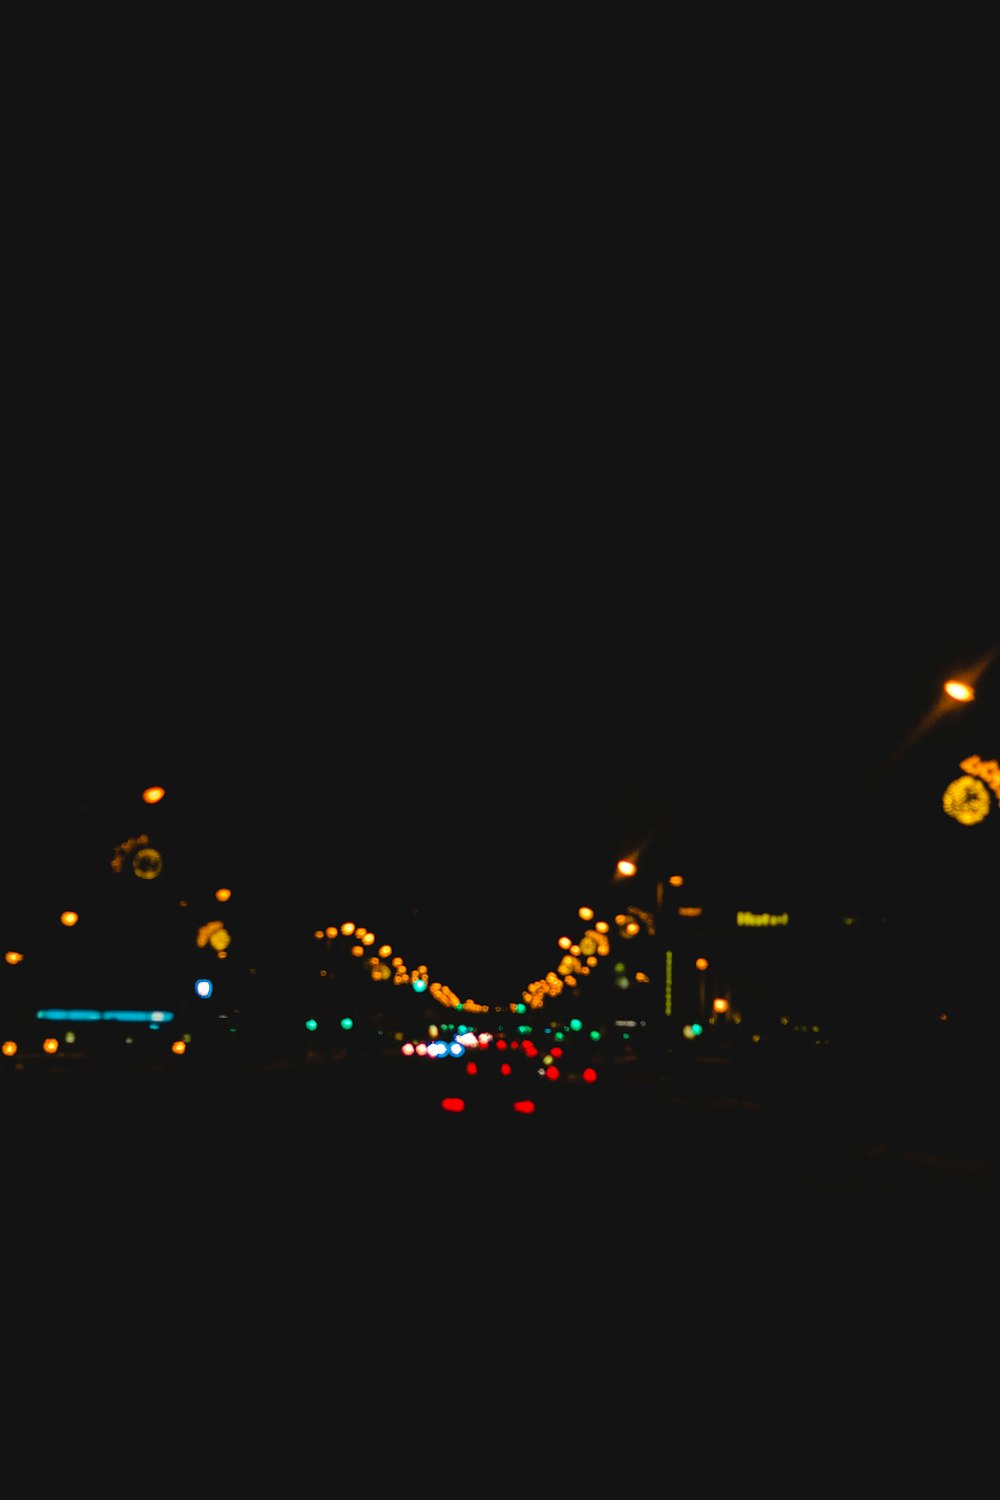 Late Night Drive Pictures | Download Free Images on Unsplash